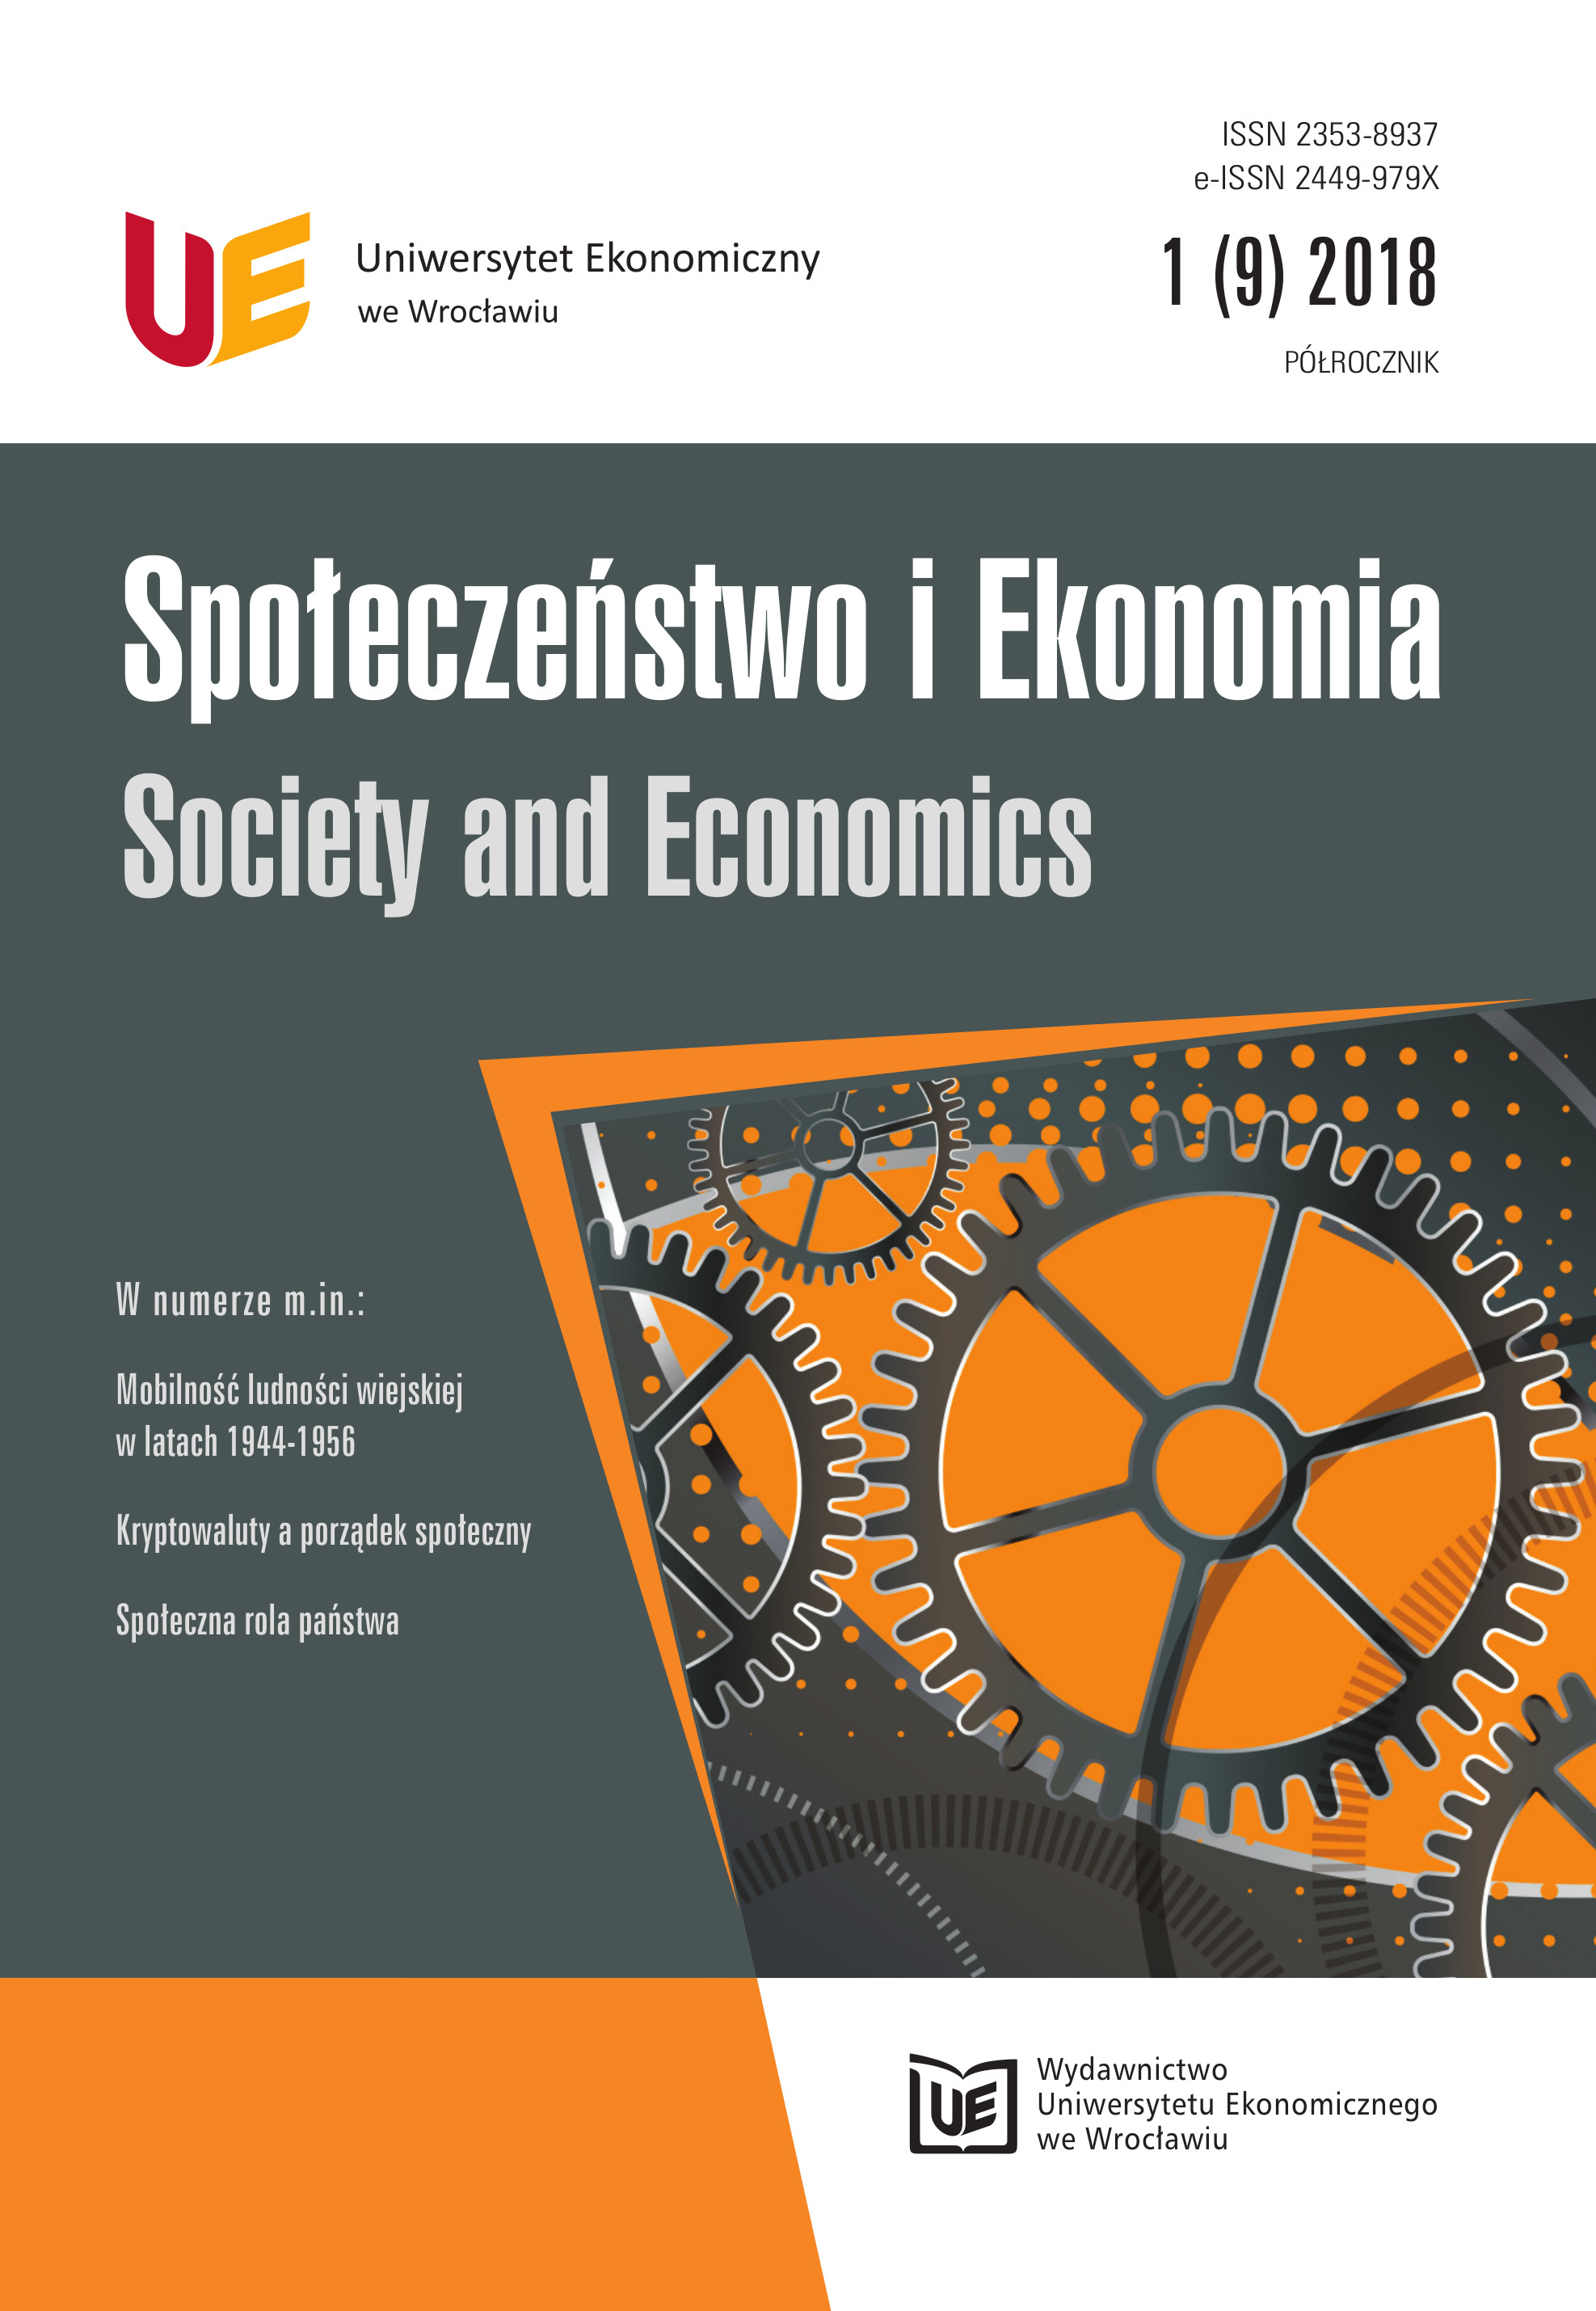 The system of higher education in the Second Polish Republic and its impact on the functioning of Polish universities after 1945 Cover Image